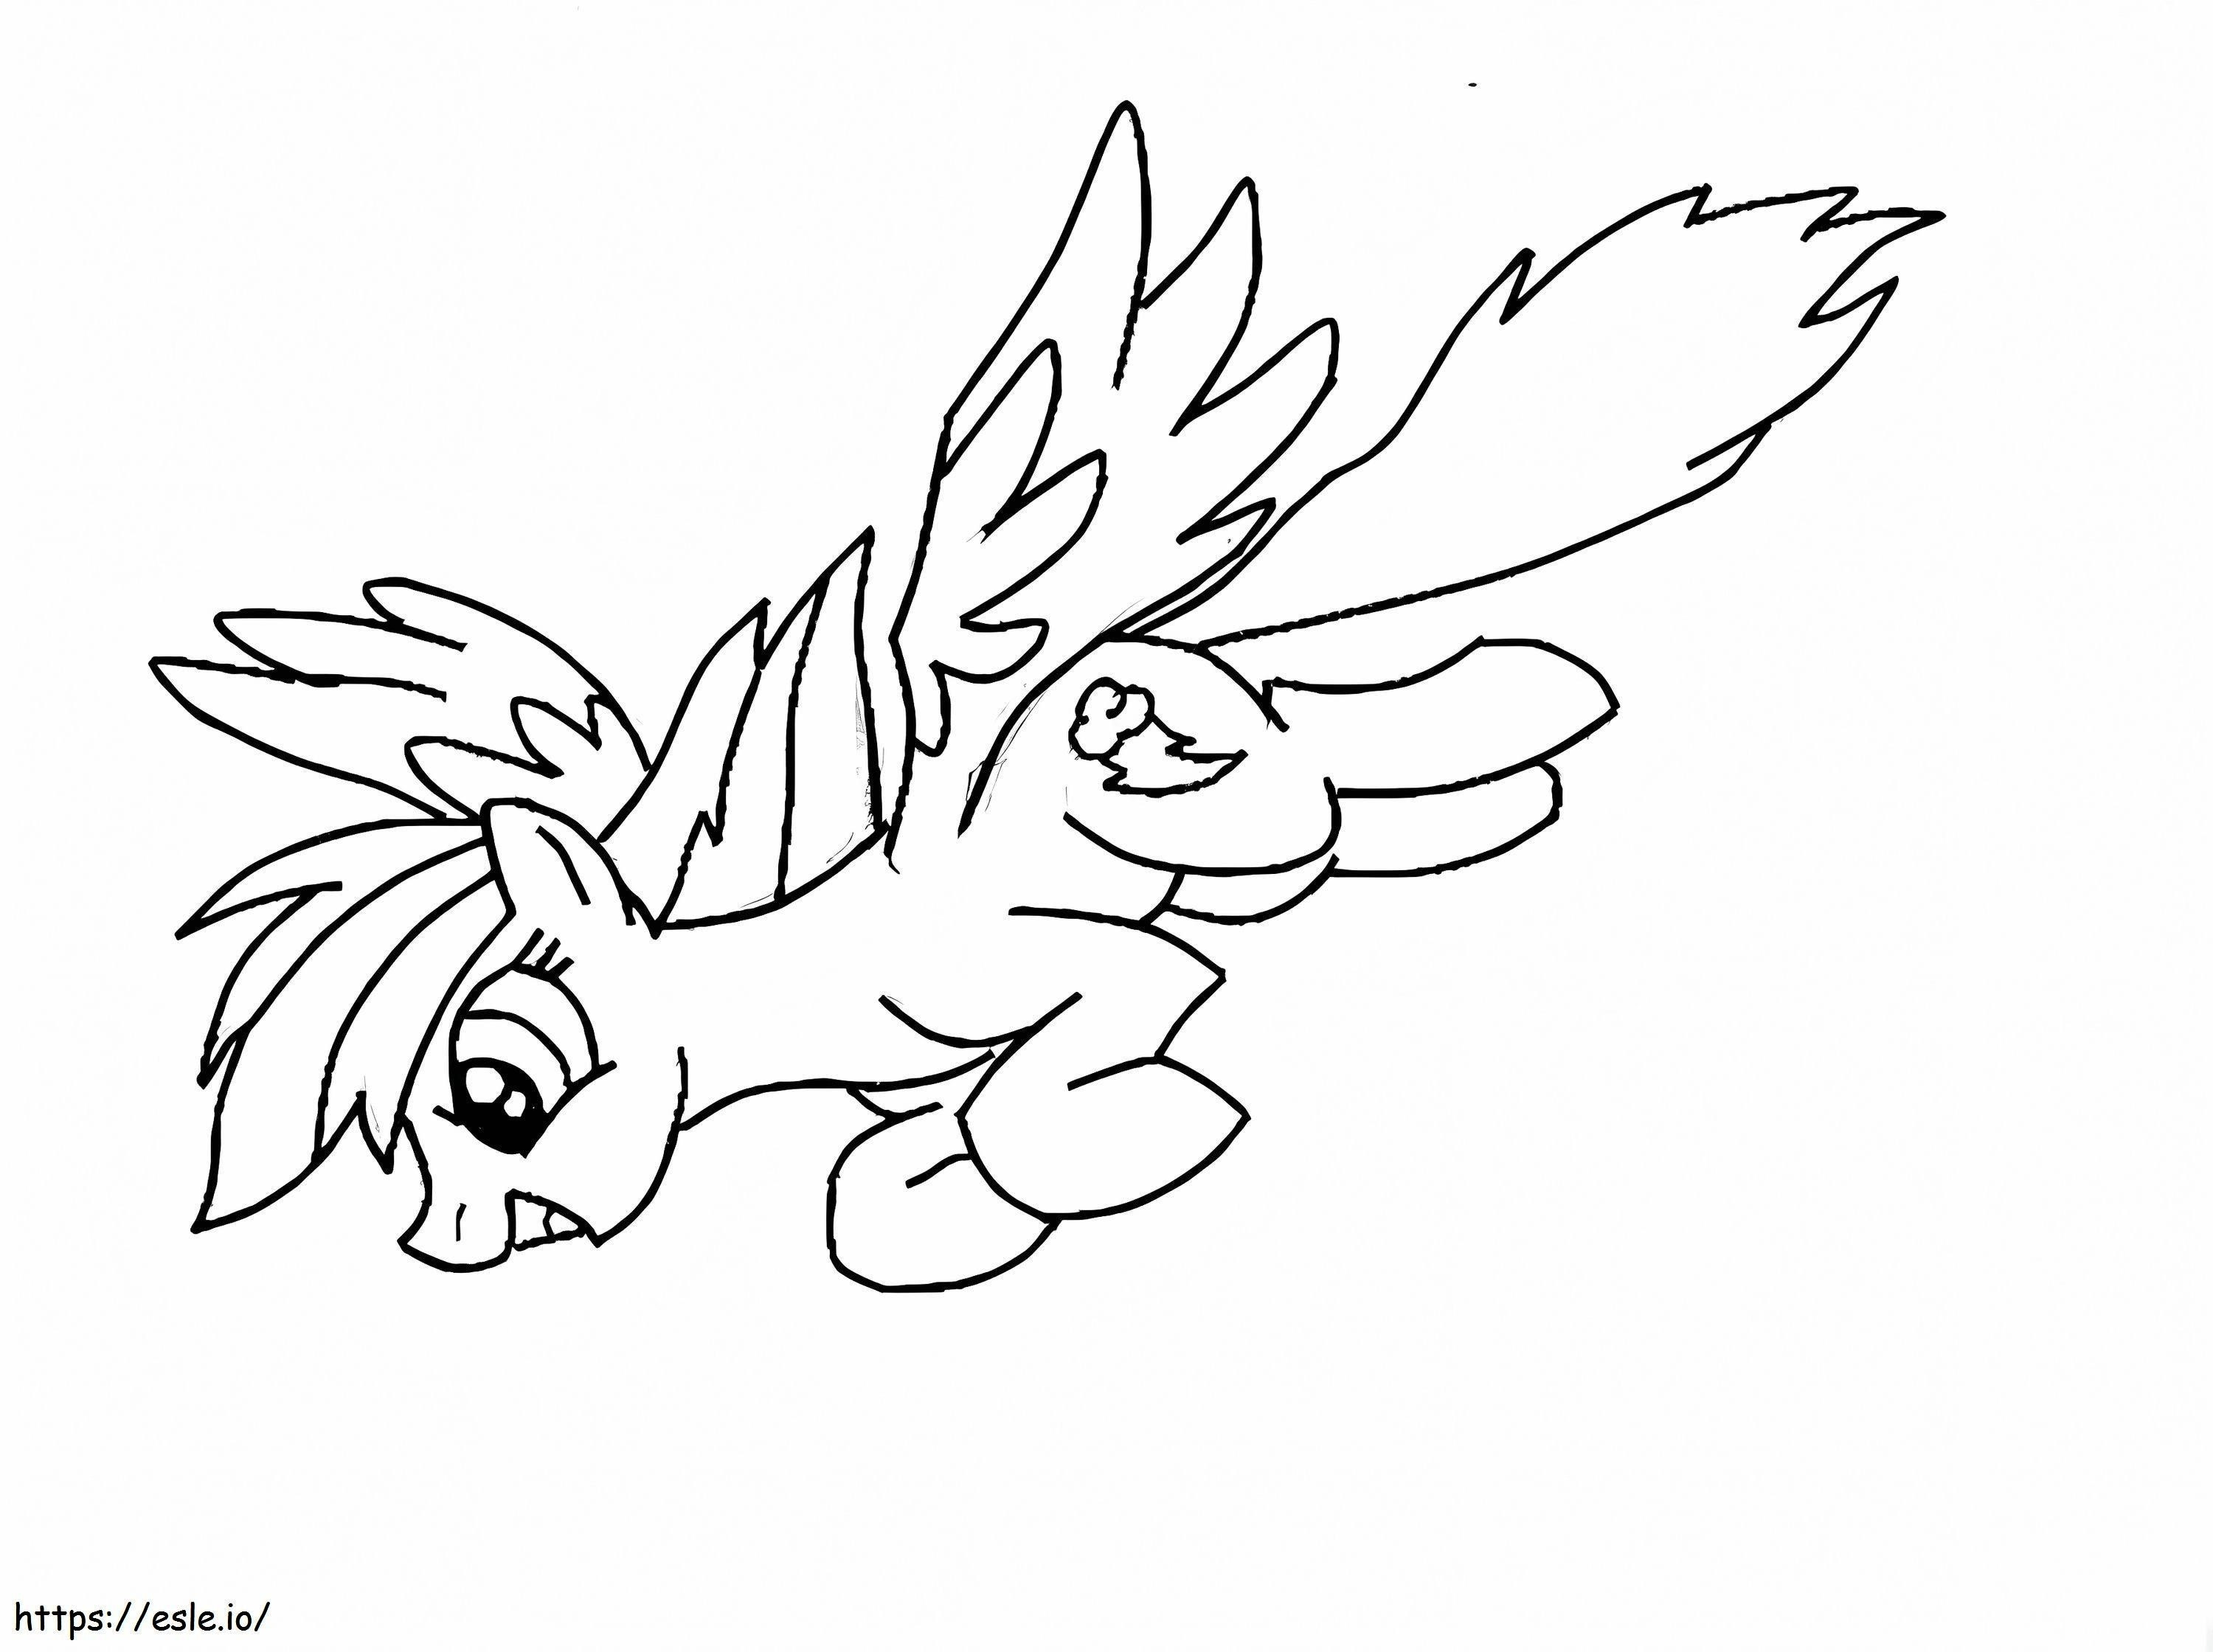 Rainbow Dash Flying Down coloring page